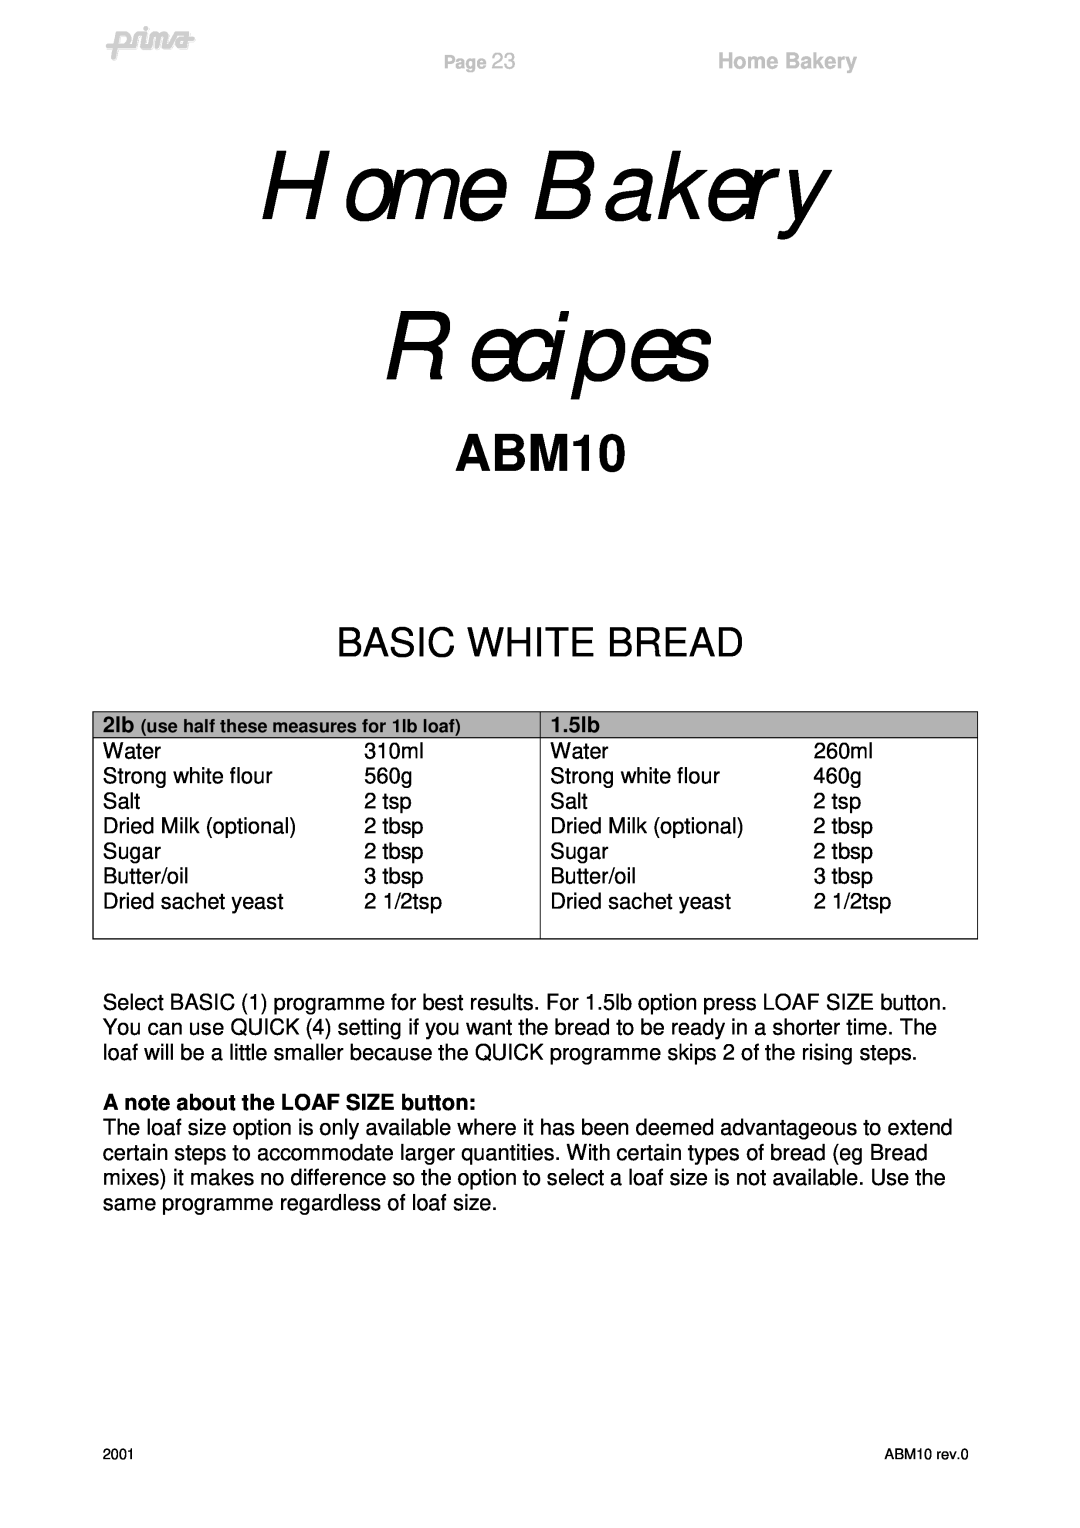 Prima ABM10 instruction manual Home Bakery Recipes, Basic White Bread, 1.5lb, A note about the LOAF SIZE button 